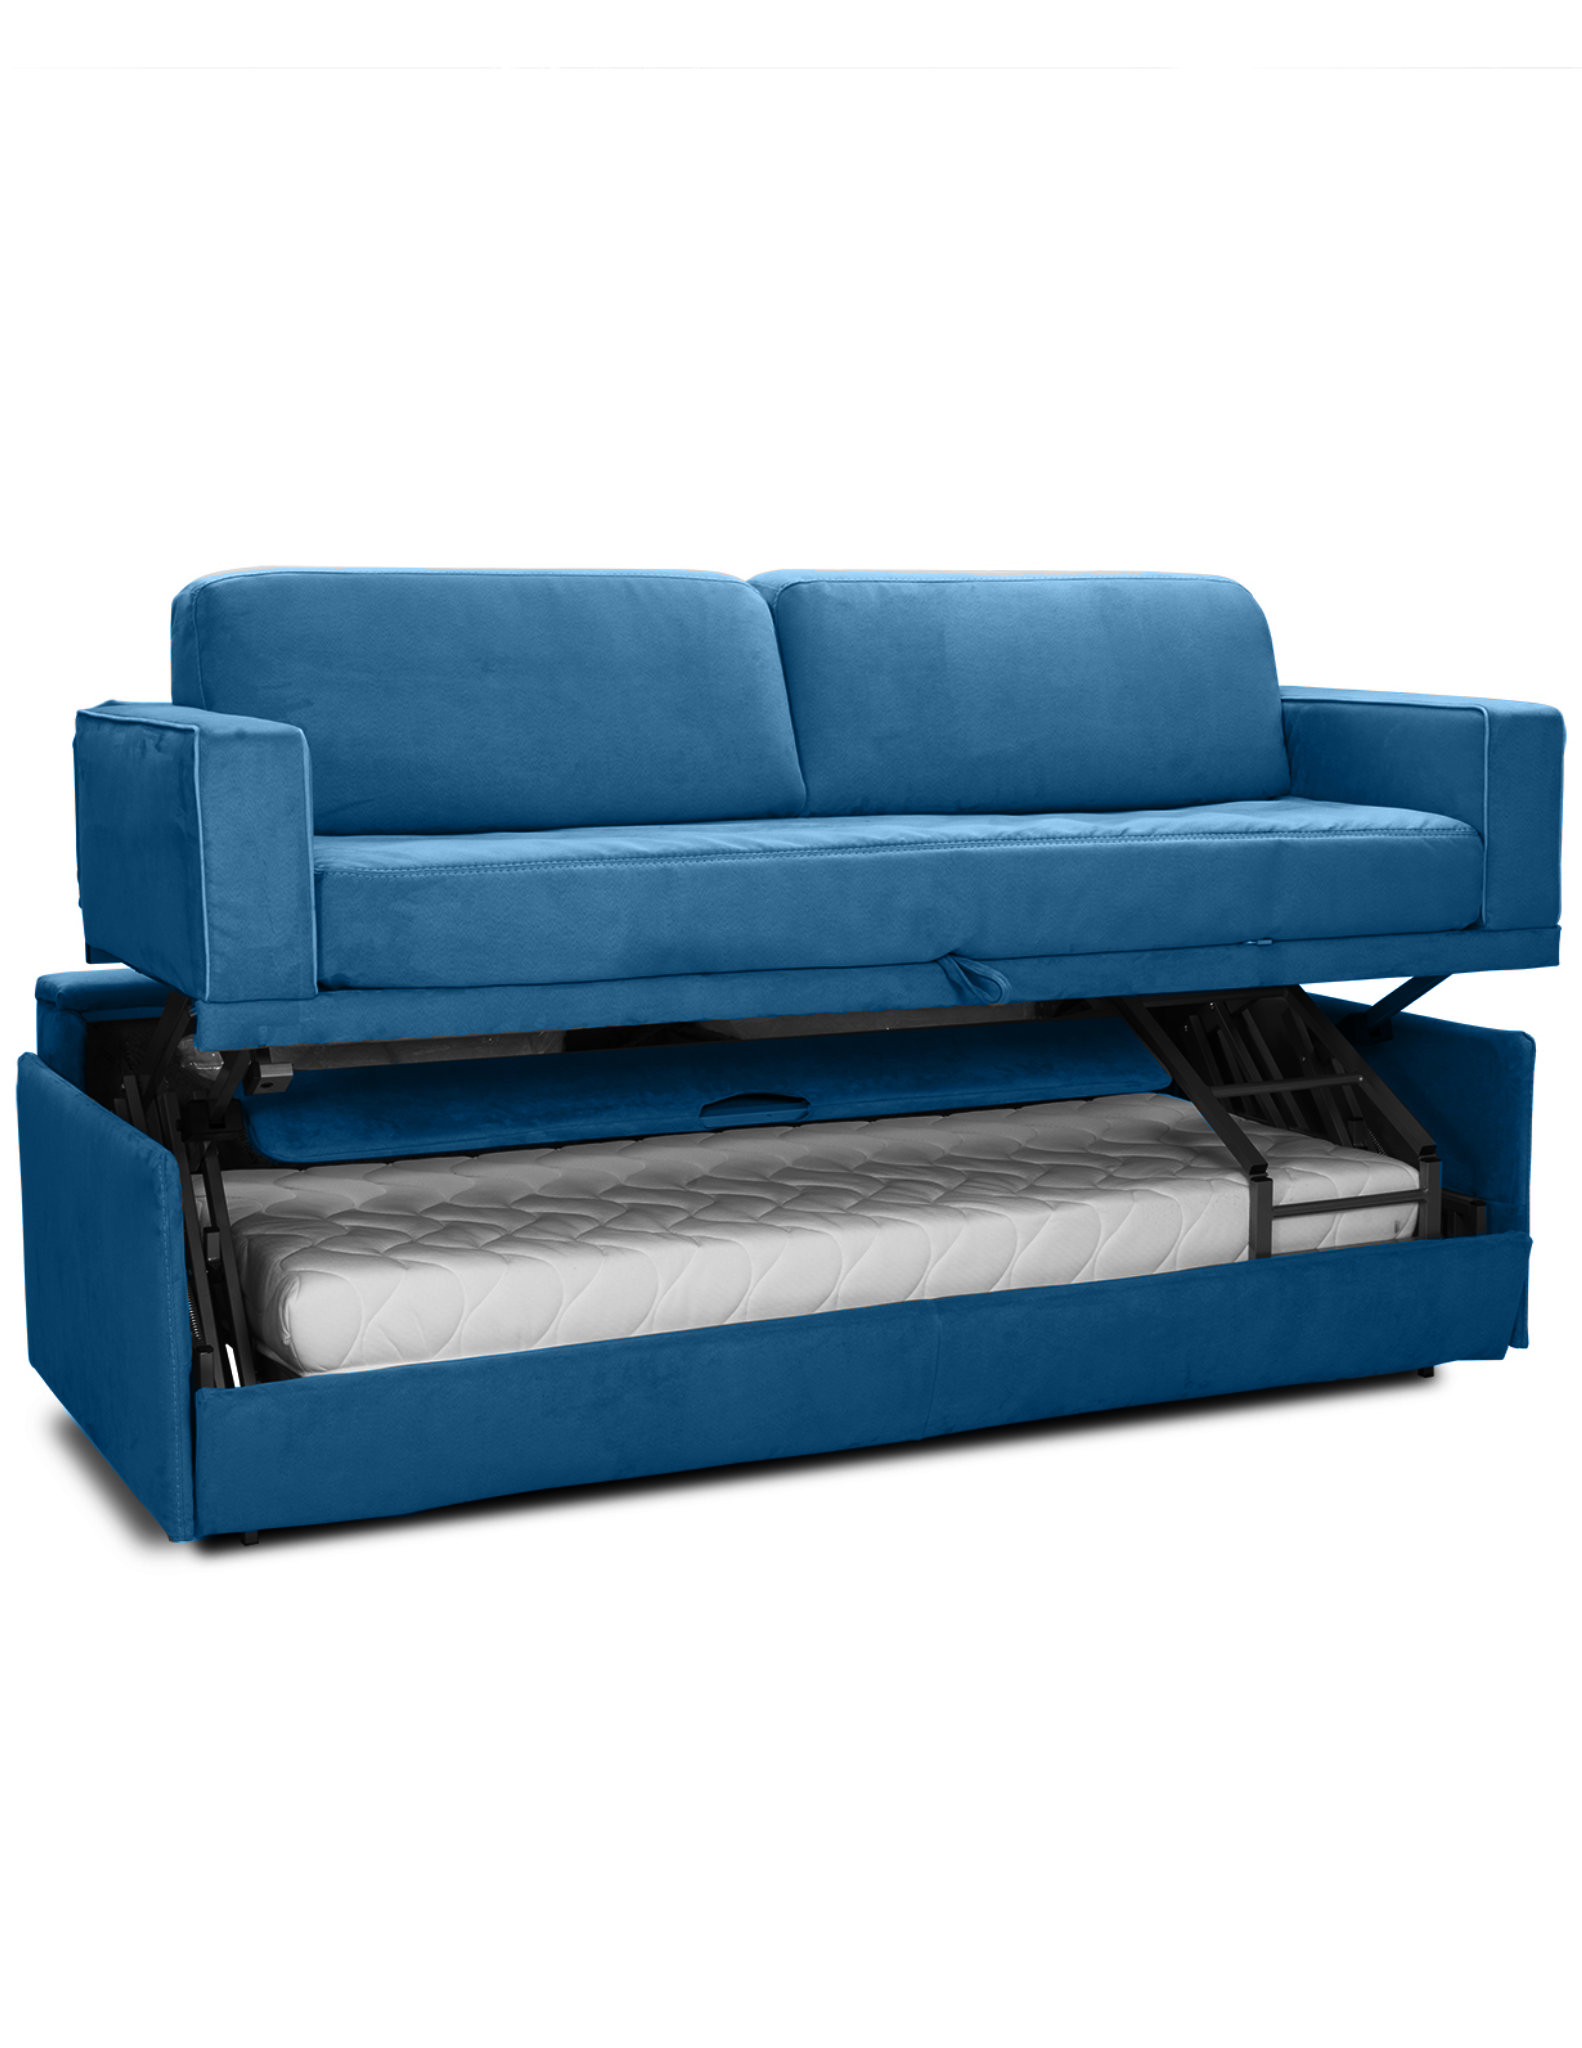 Spreekwoord Vooravond Sluiting The Dormire V2 - Bunk Bed Couch Transformer - Expand Furniture - Folding  Tables, Smarter Wall Beds, Space Savers